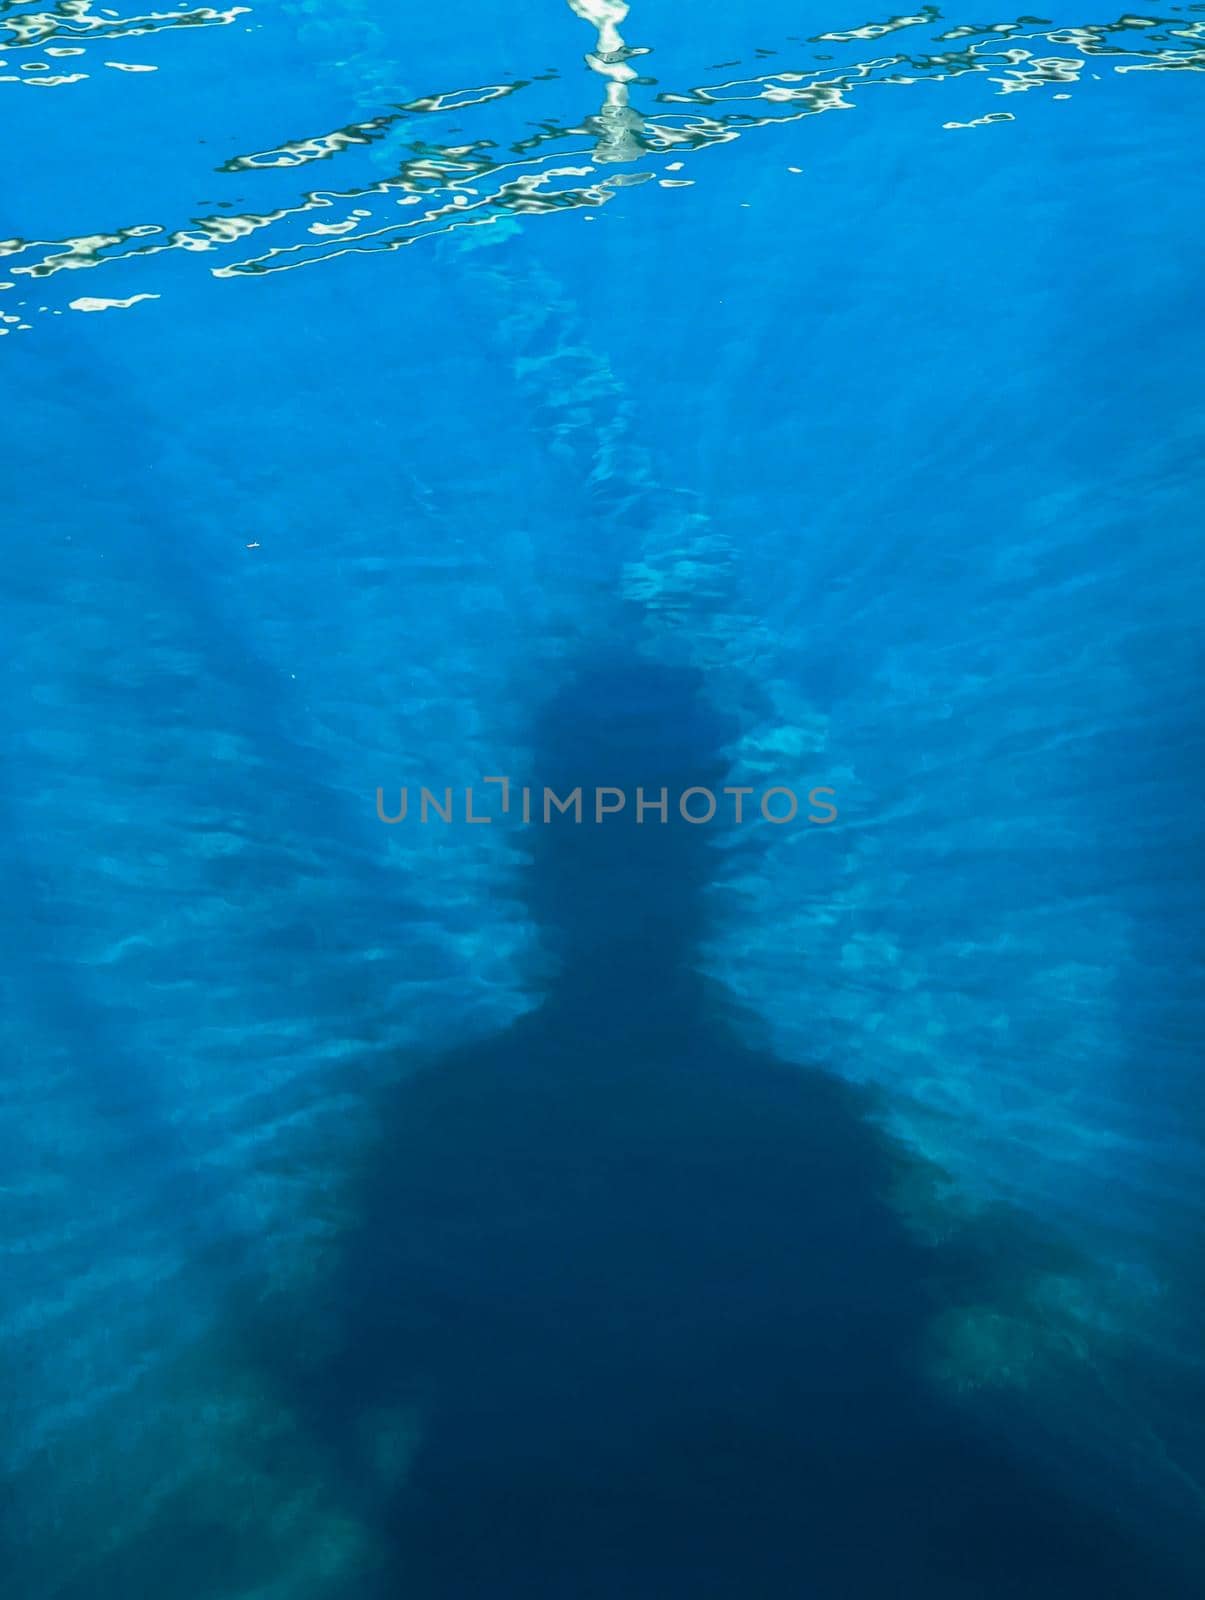 shadow of a person in pool of water by digidreamgrafix